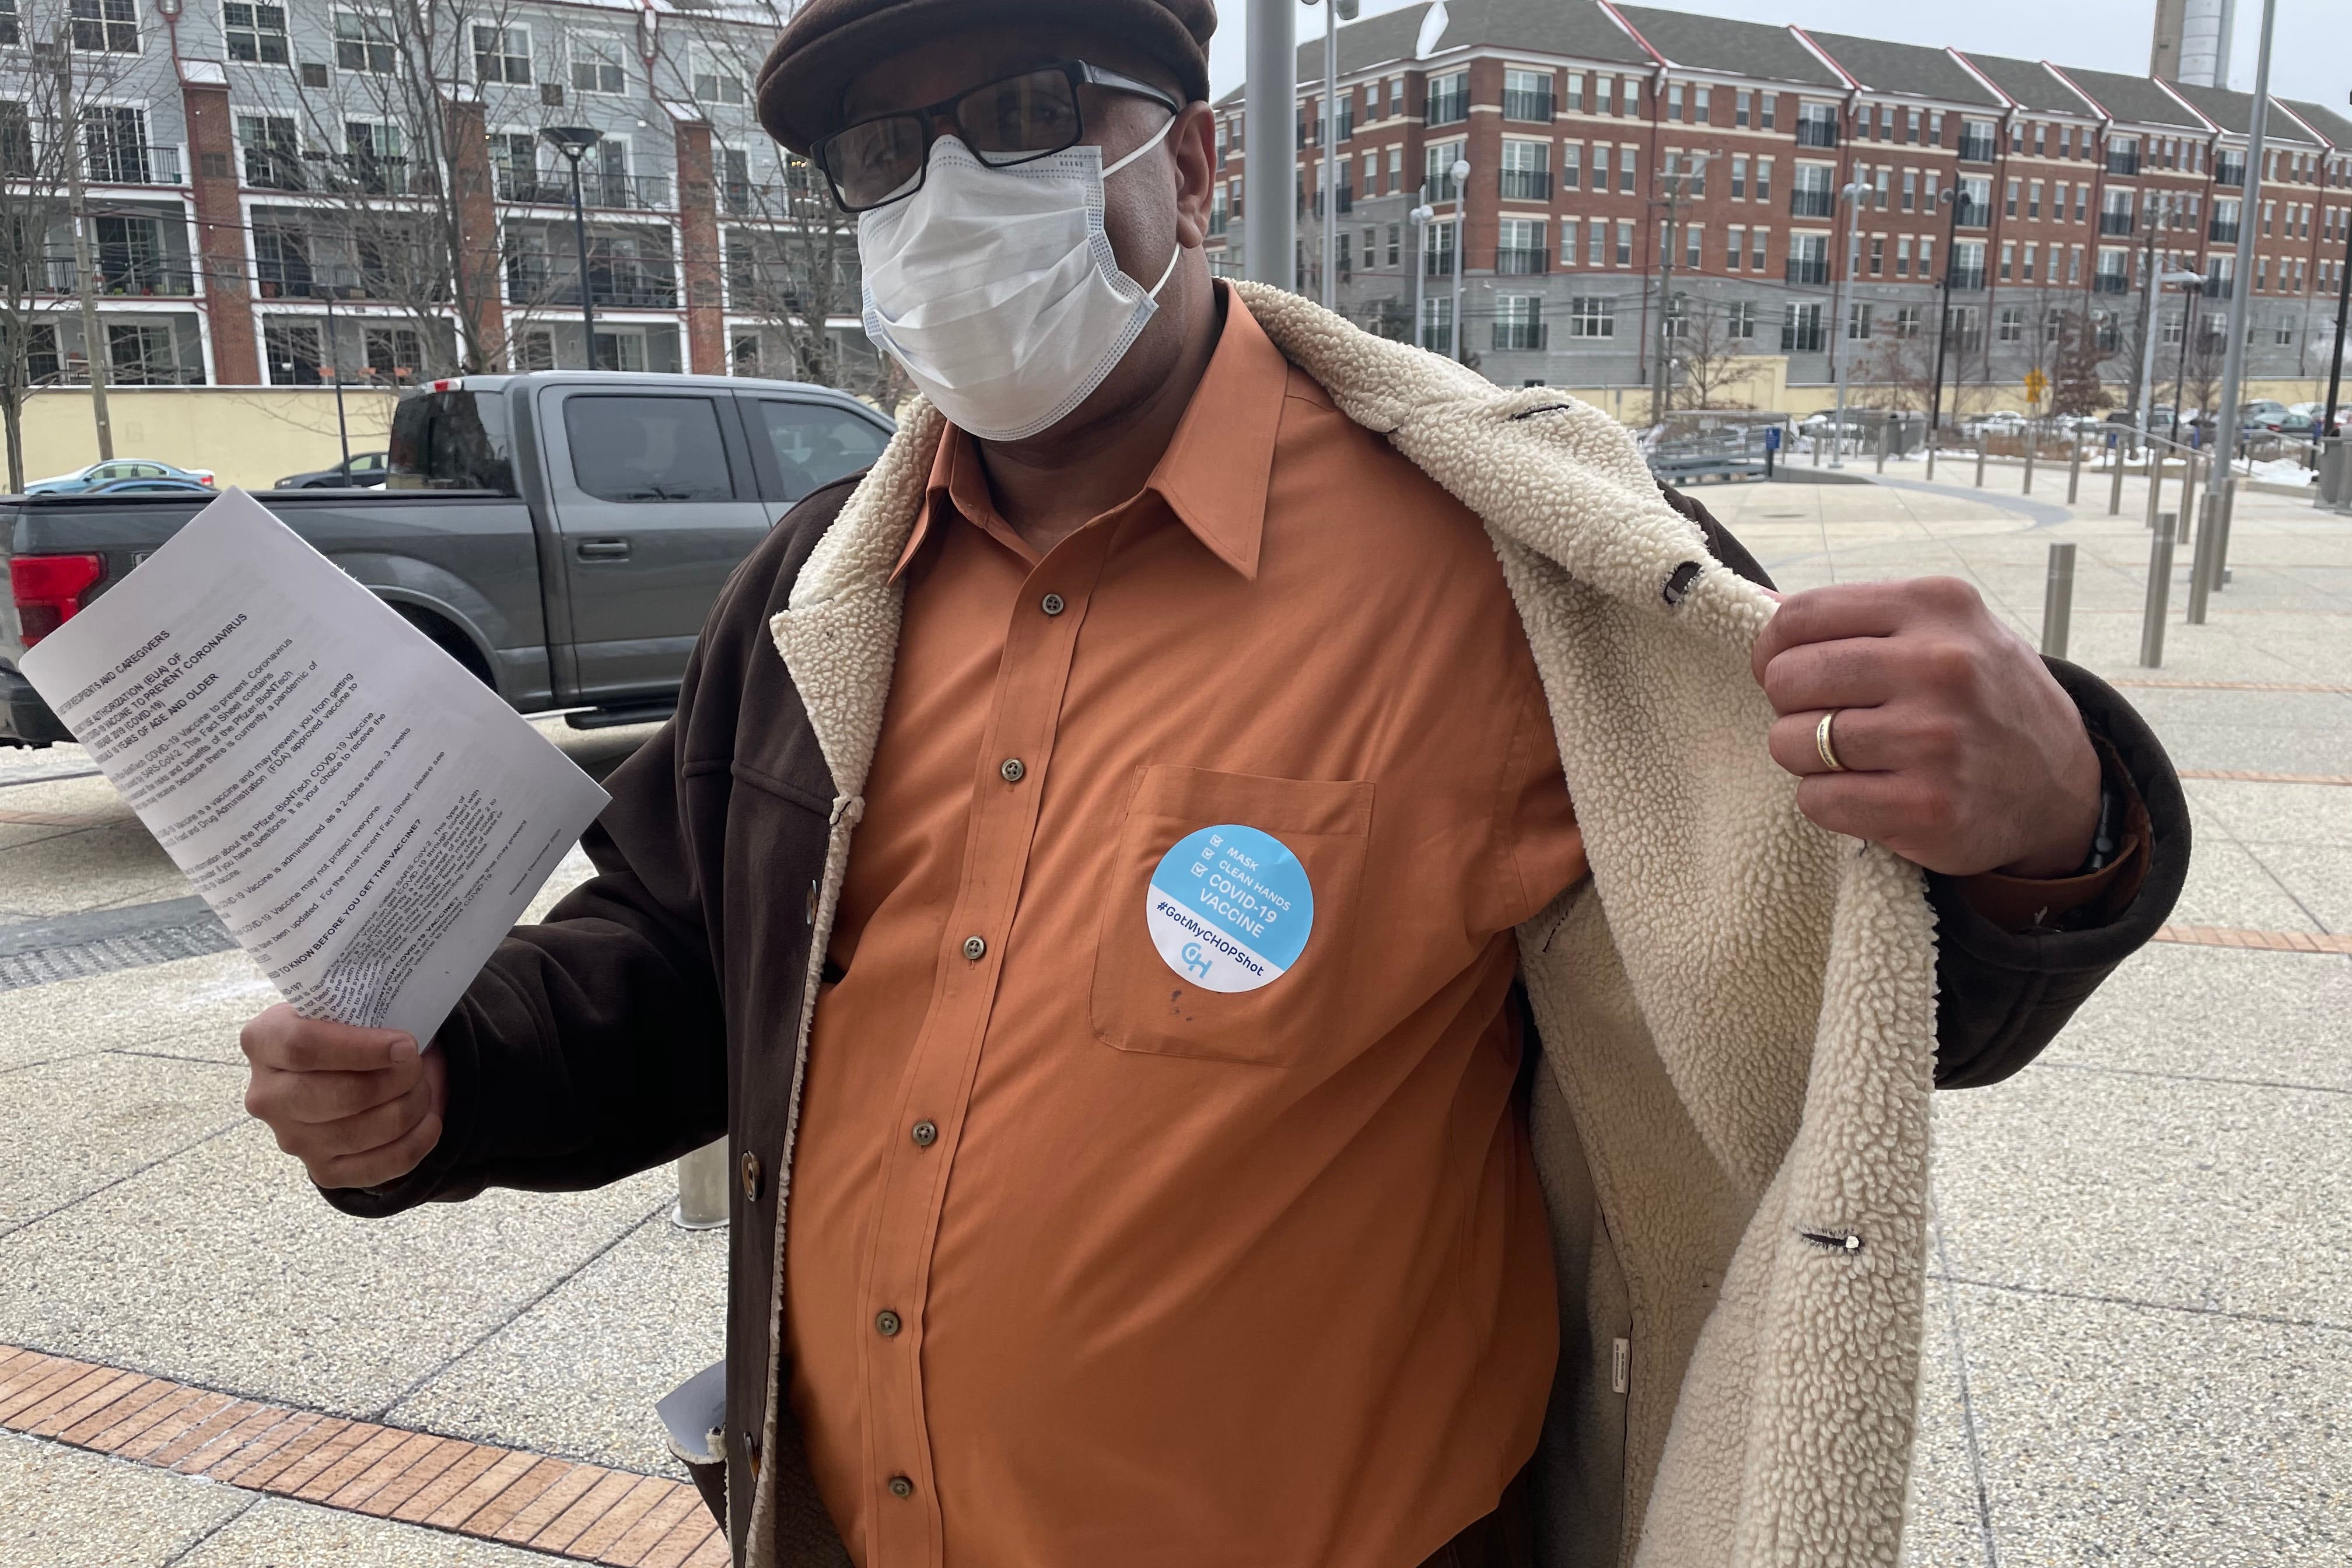 Keith Arrington, principal at John F. Hartranft Elementary School, wearing a face mask and showing off his sticker for taking the vaccine shot.